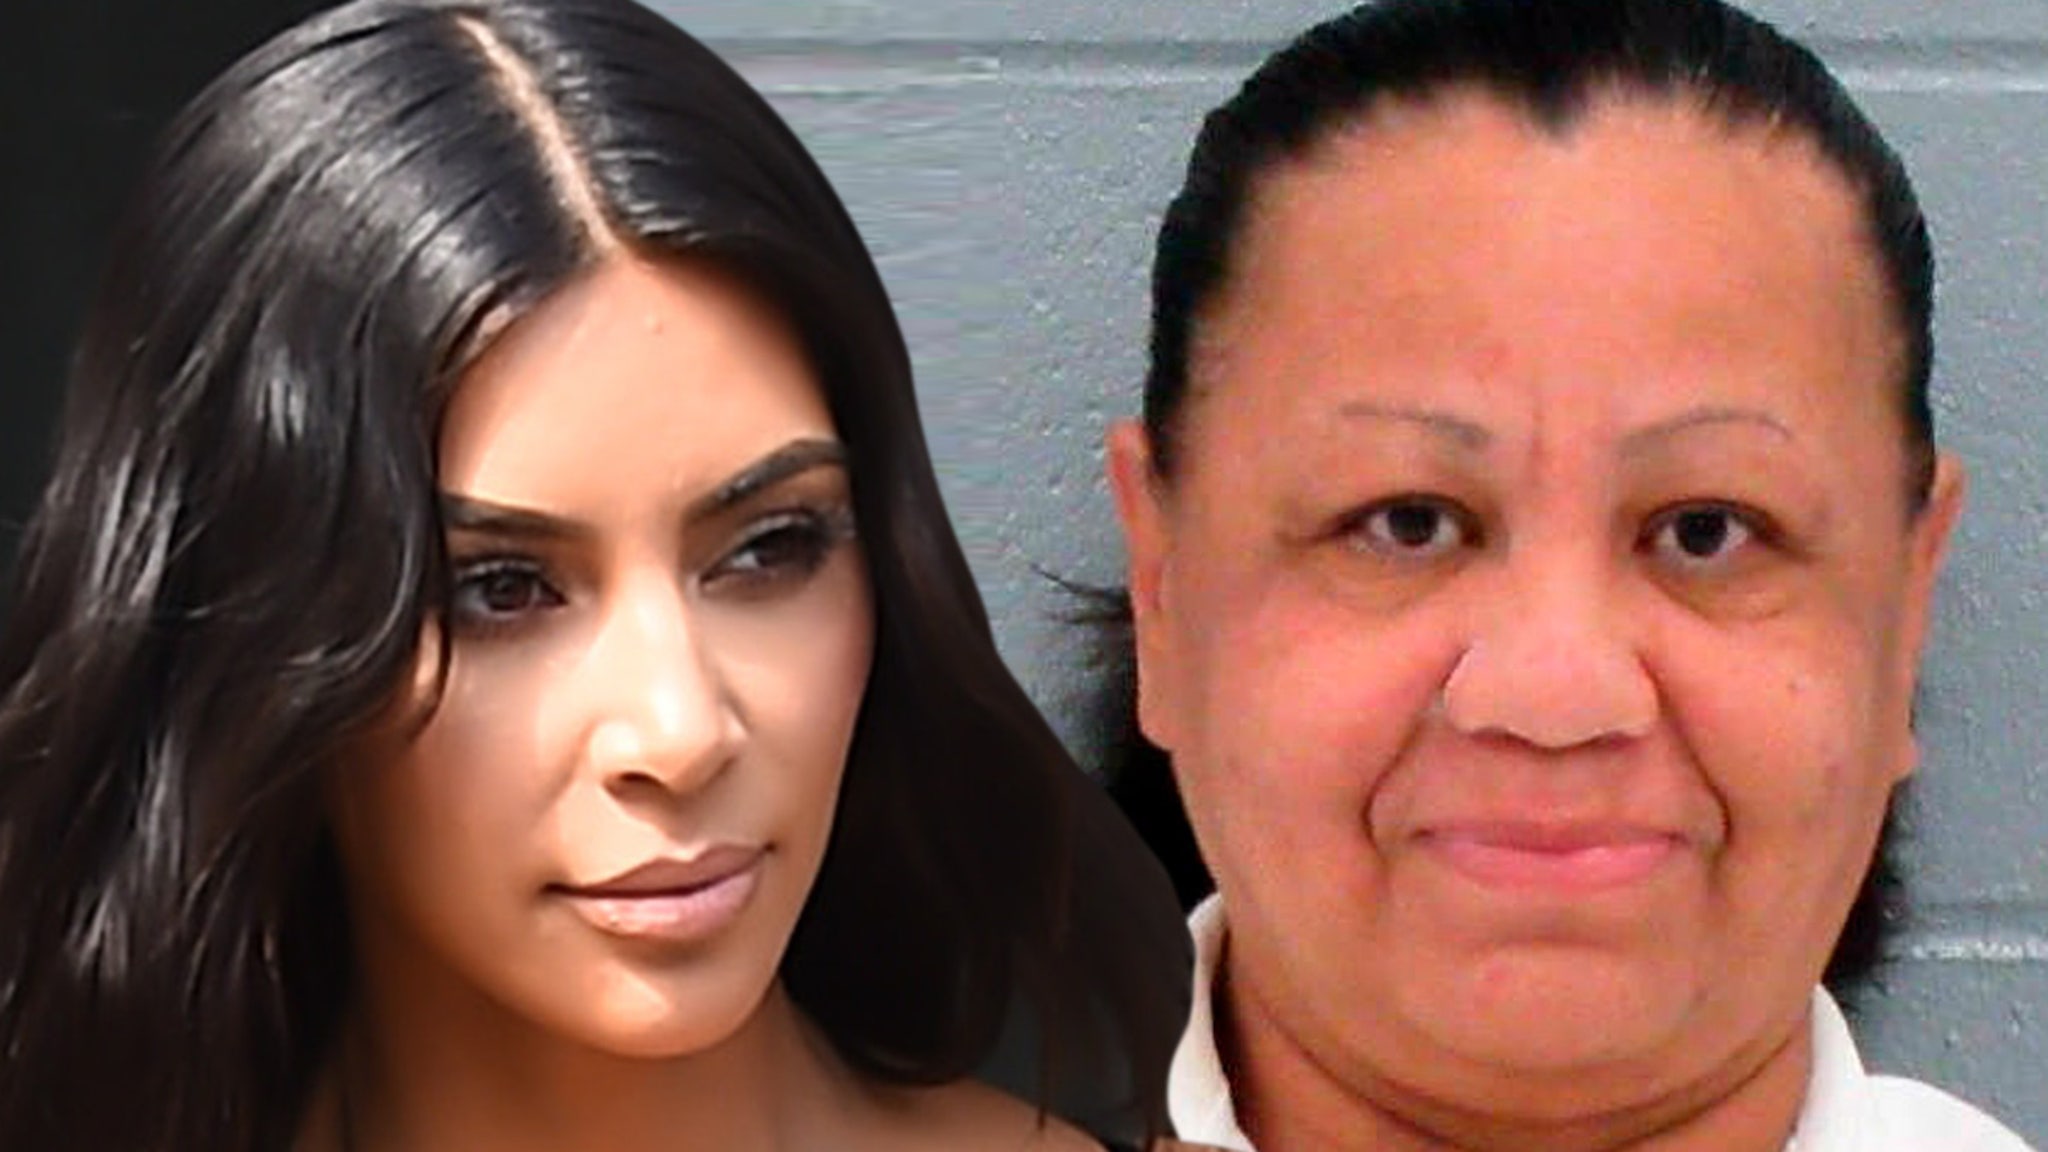 Texas Death Row Inmate and Family Thankful for Kim Kardashian Support